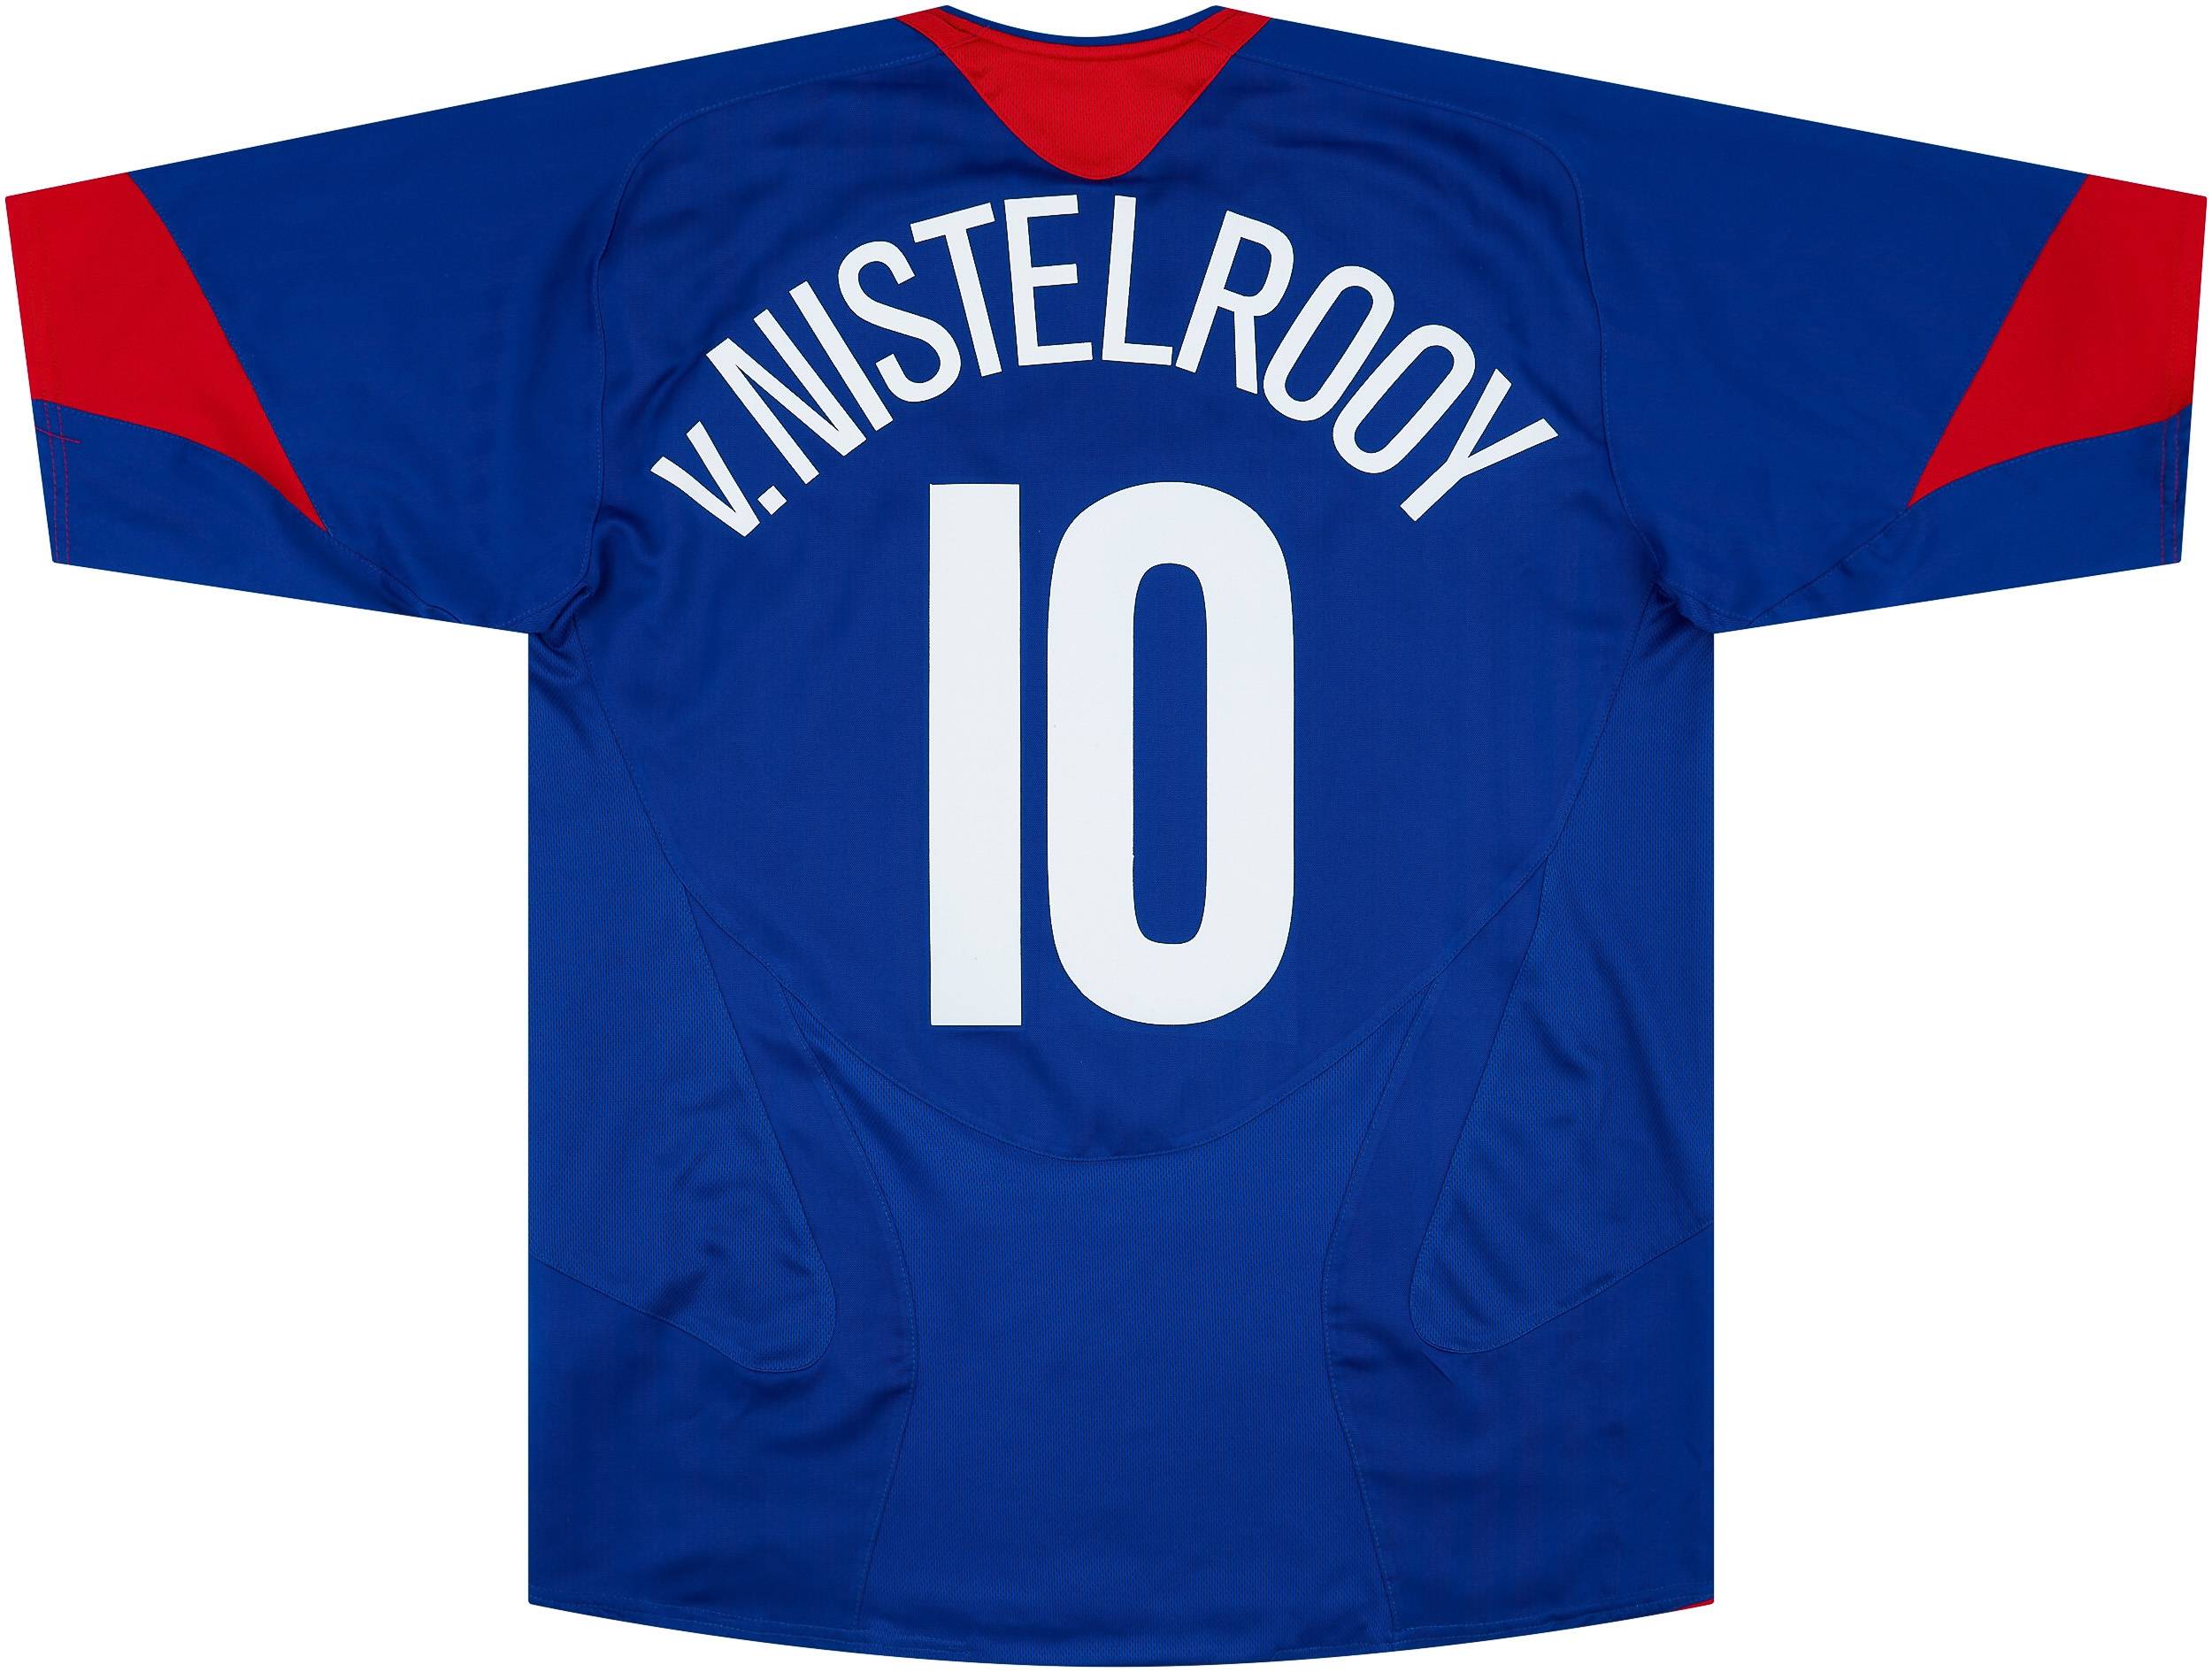 2005-06 Manchester United Away Shirt V.Nistelrooy #10